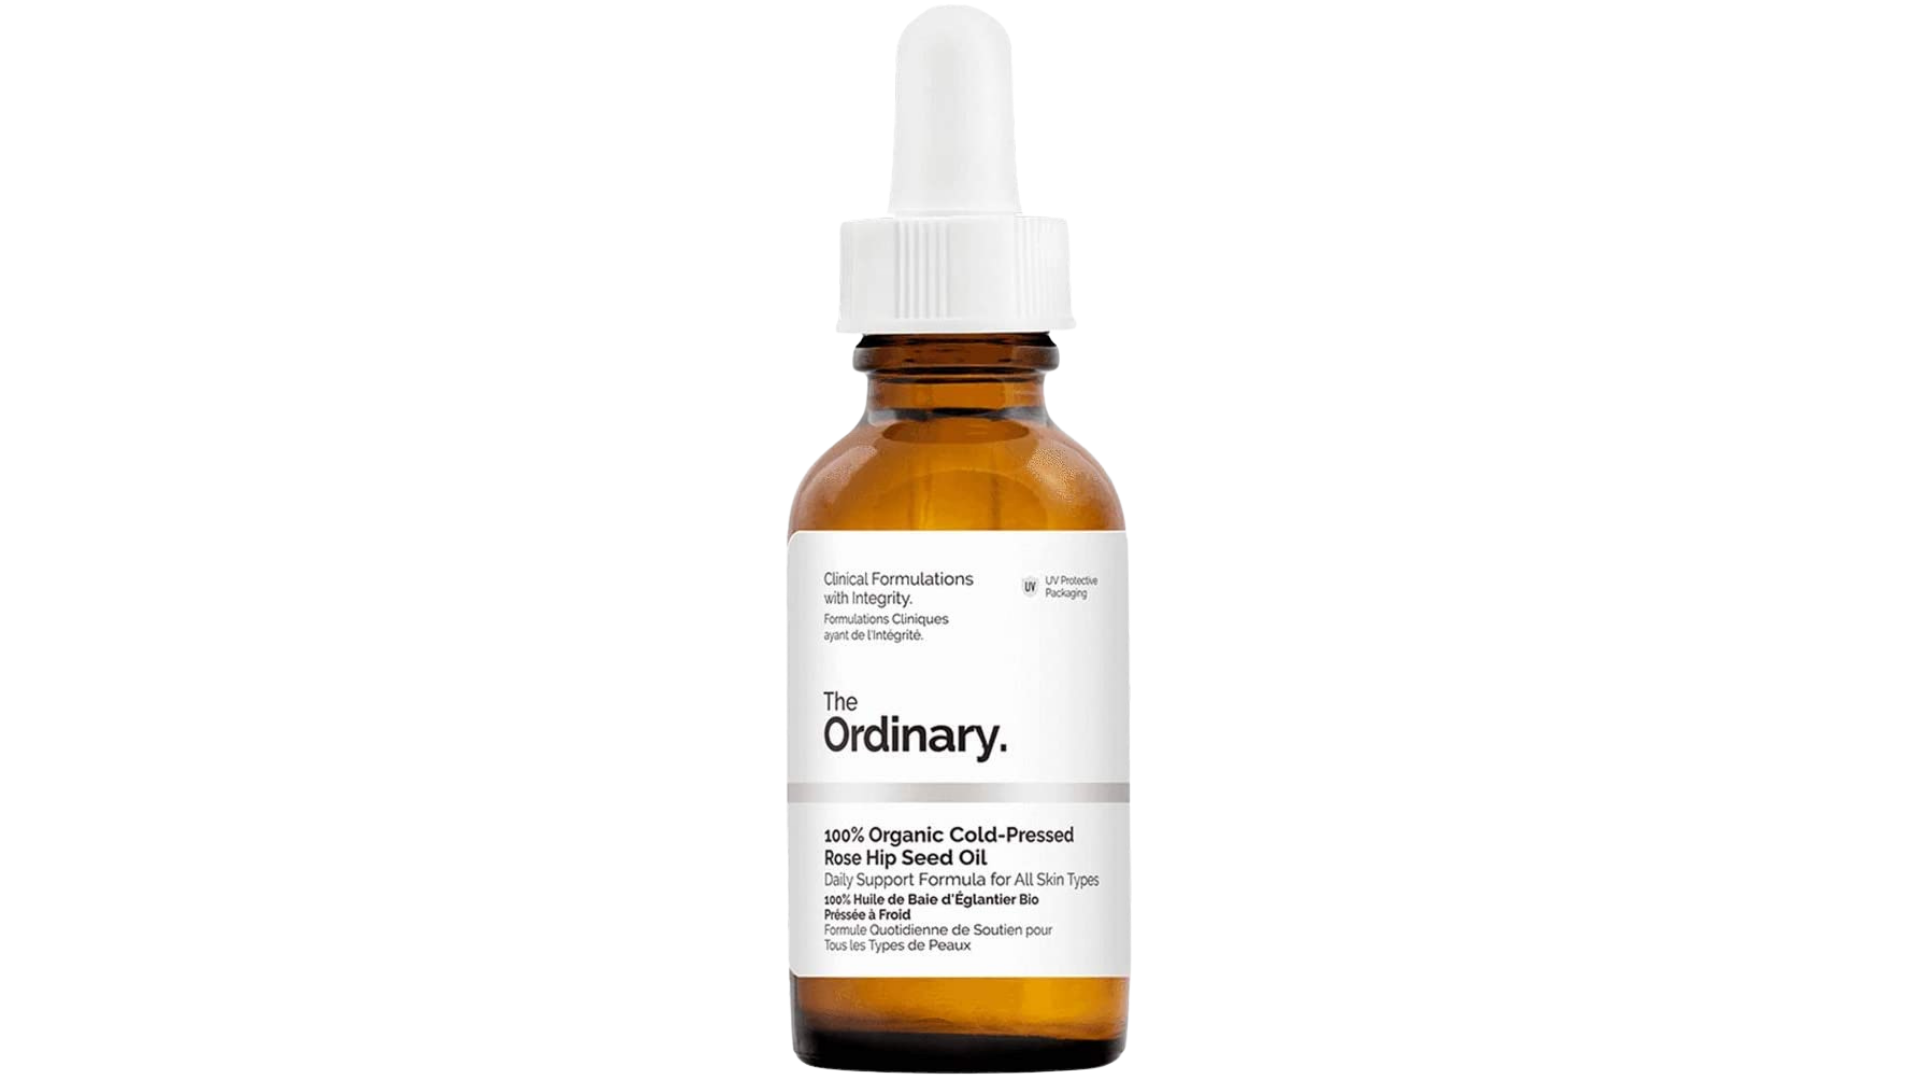 The Ordinary 100% Organic Cold-Pressed Rose Hip Seed Oil skin and hair